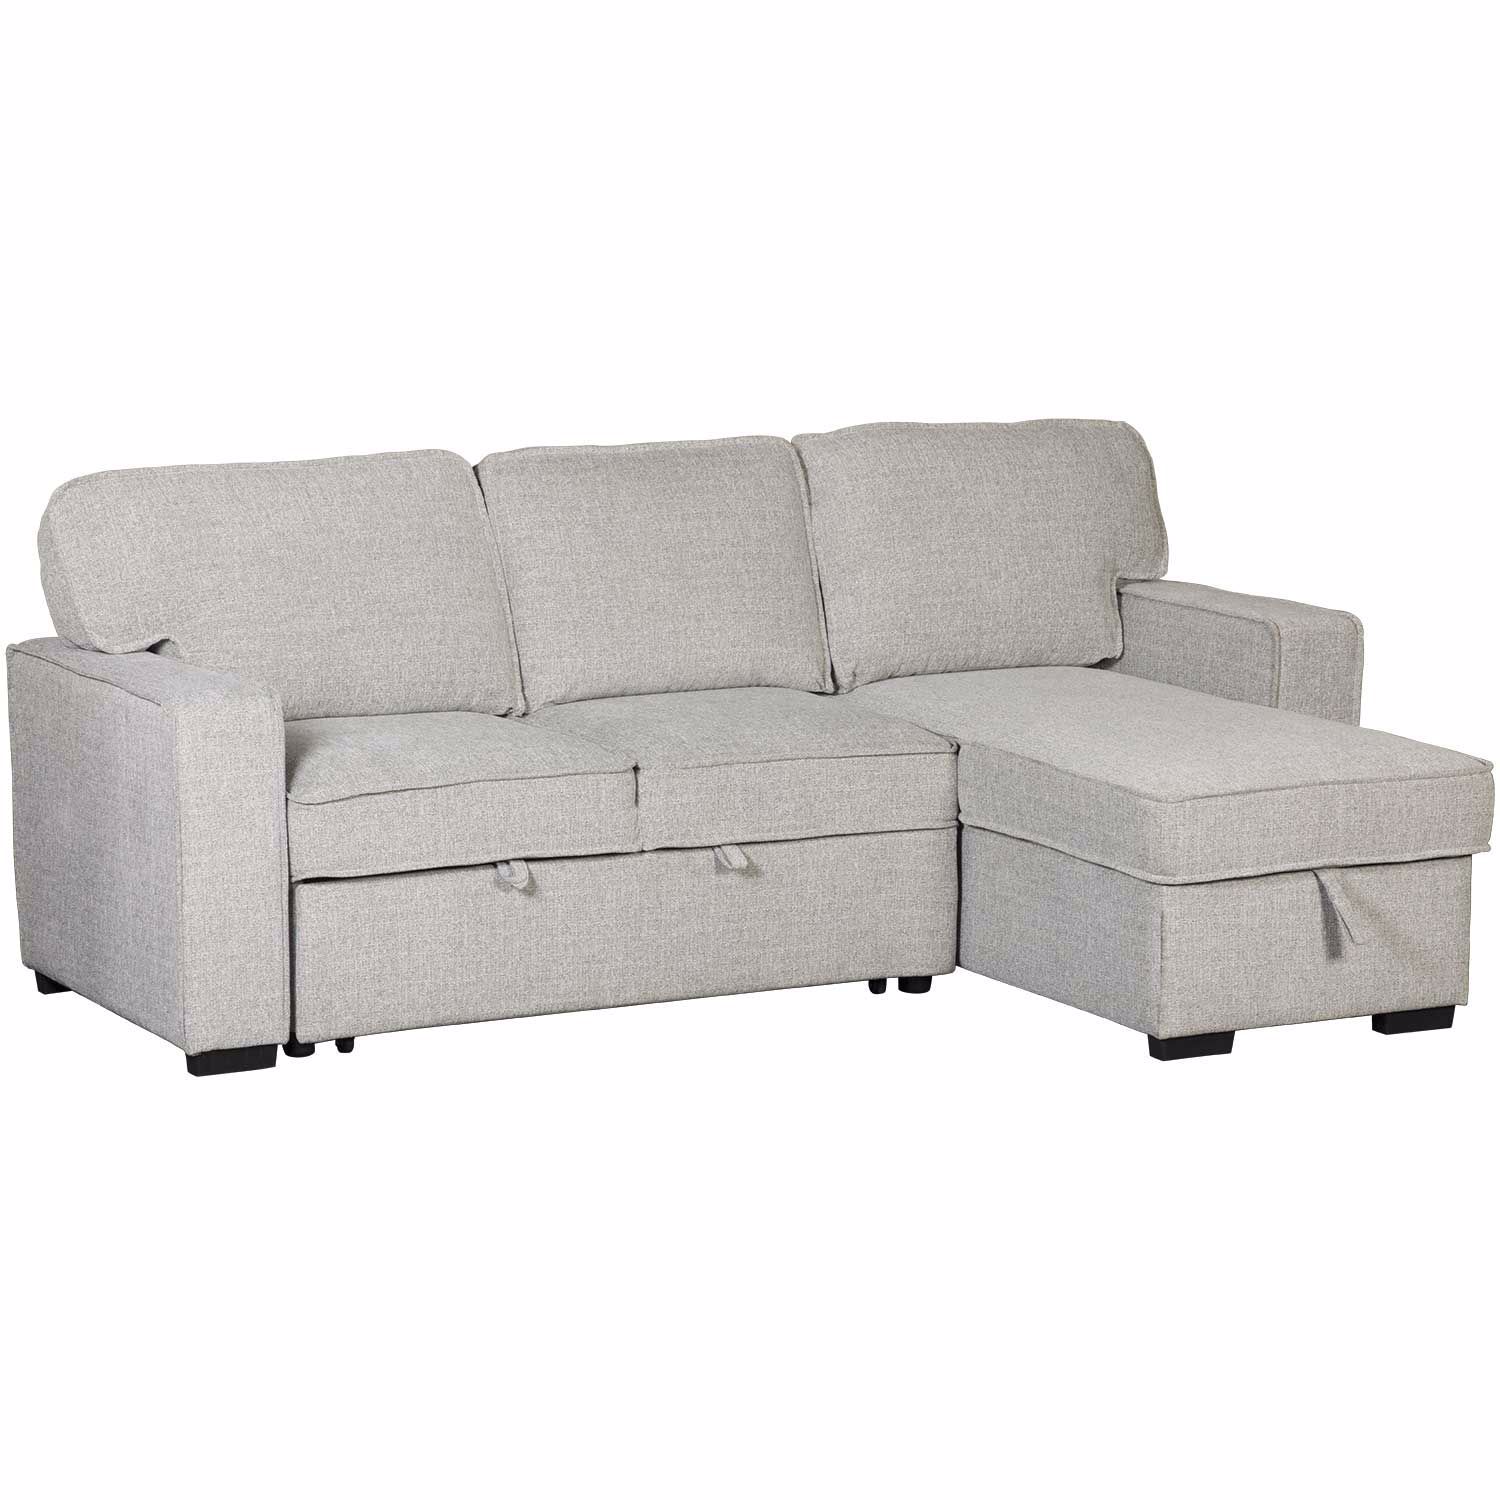 What Is A Reversible Sofa